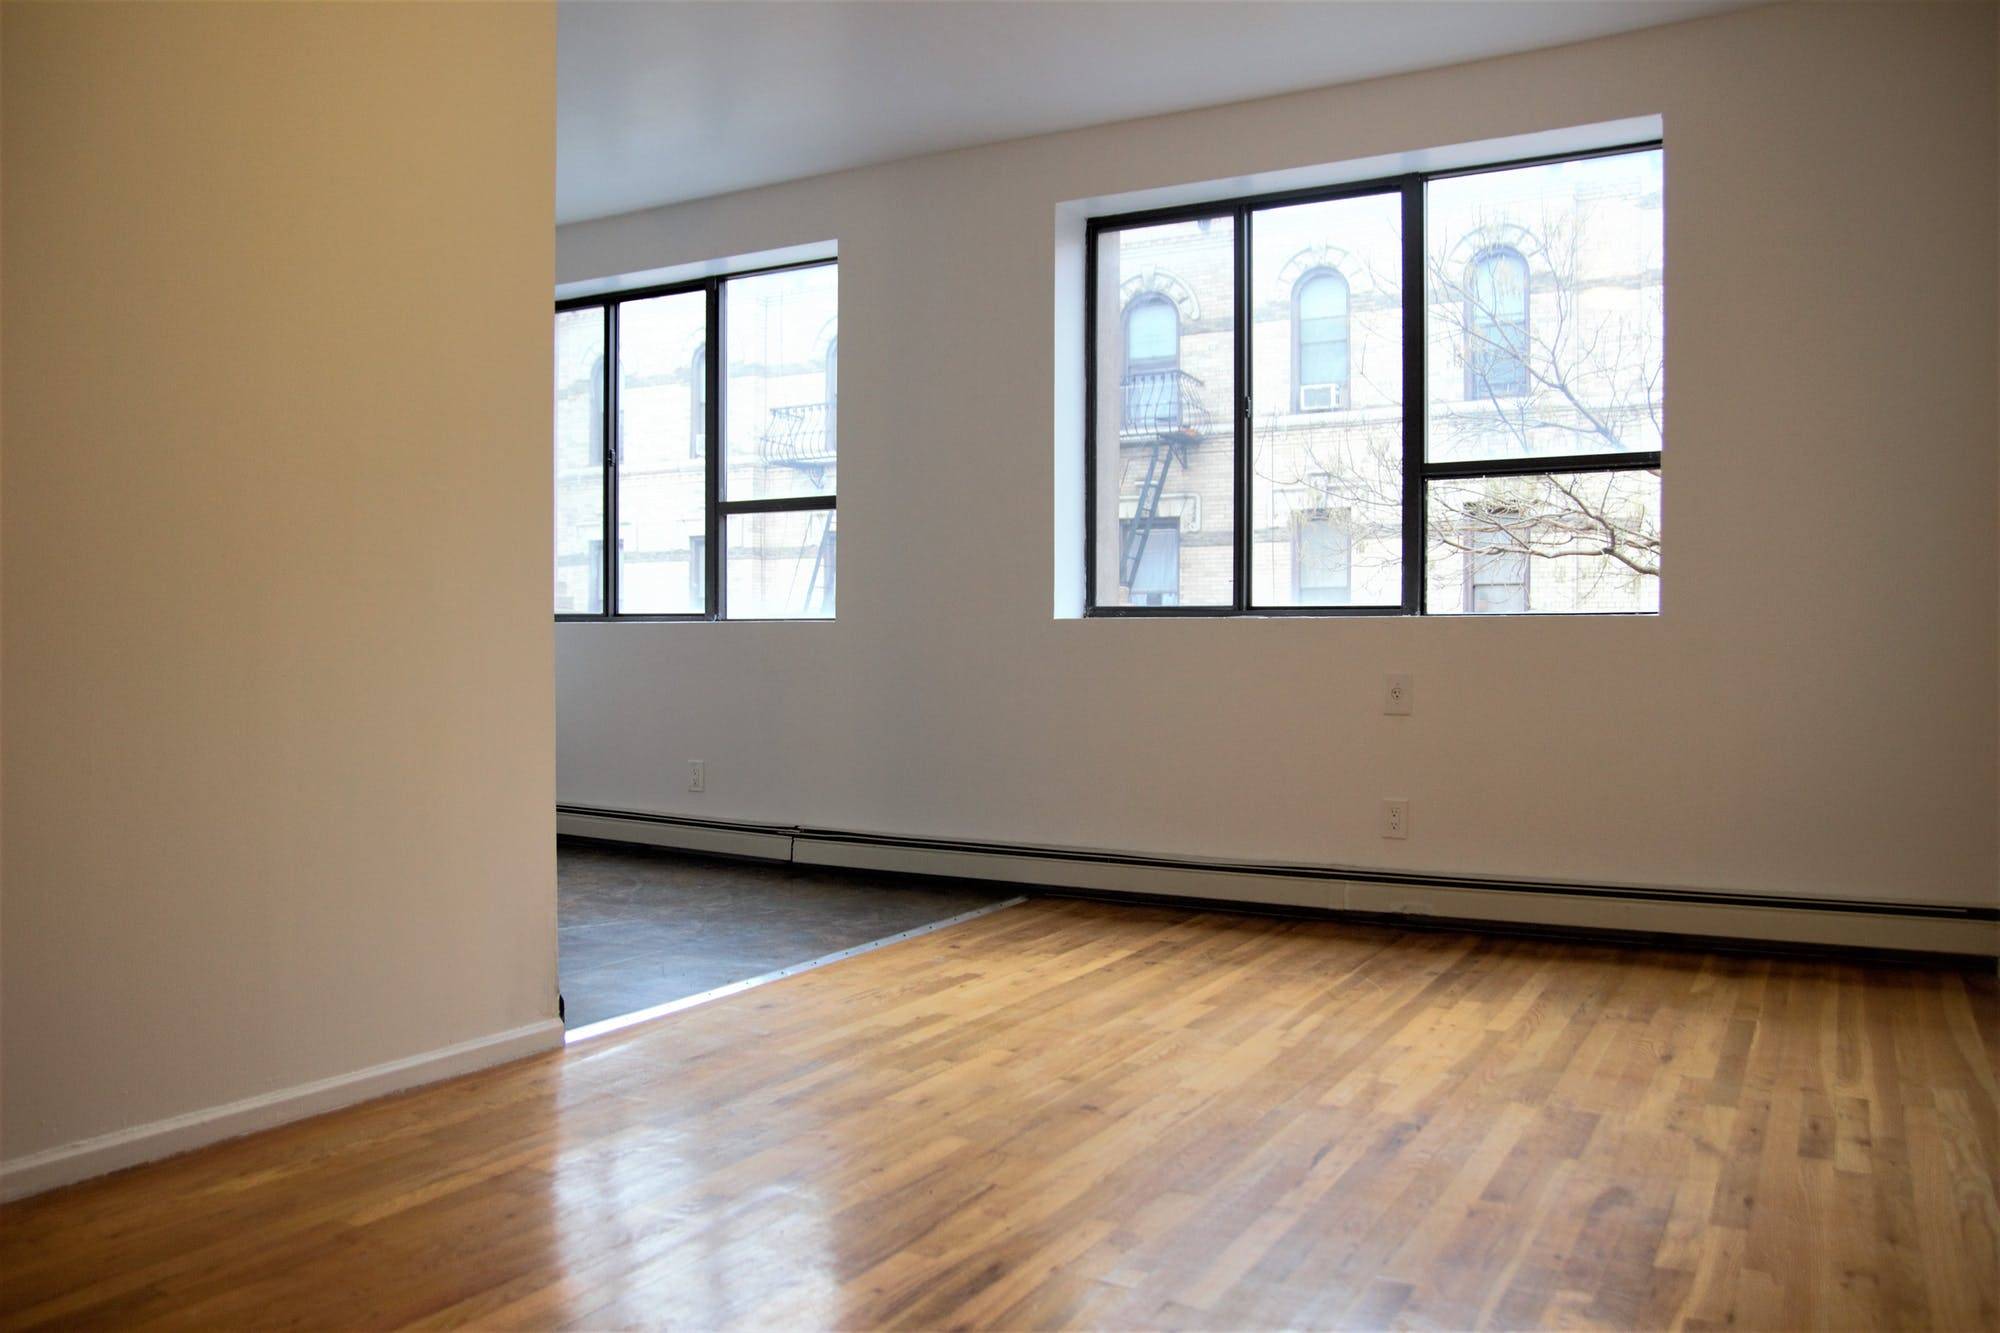 Here is a 3 bedroom 1. 5 Bathroom on the border of Bed Stuy and Clinton Hill.